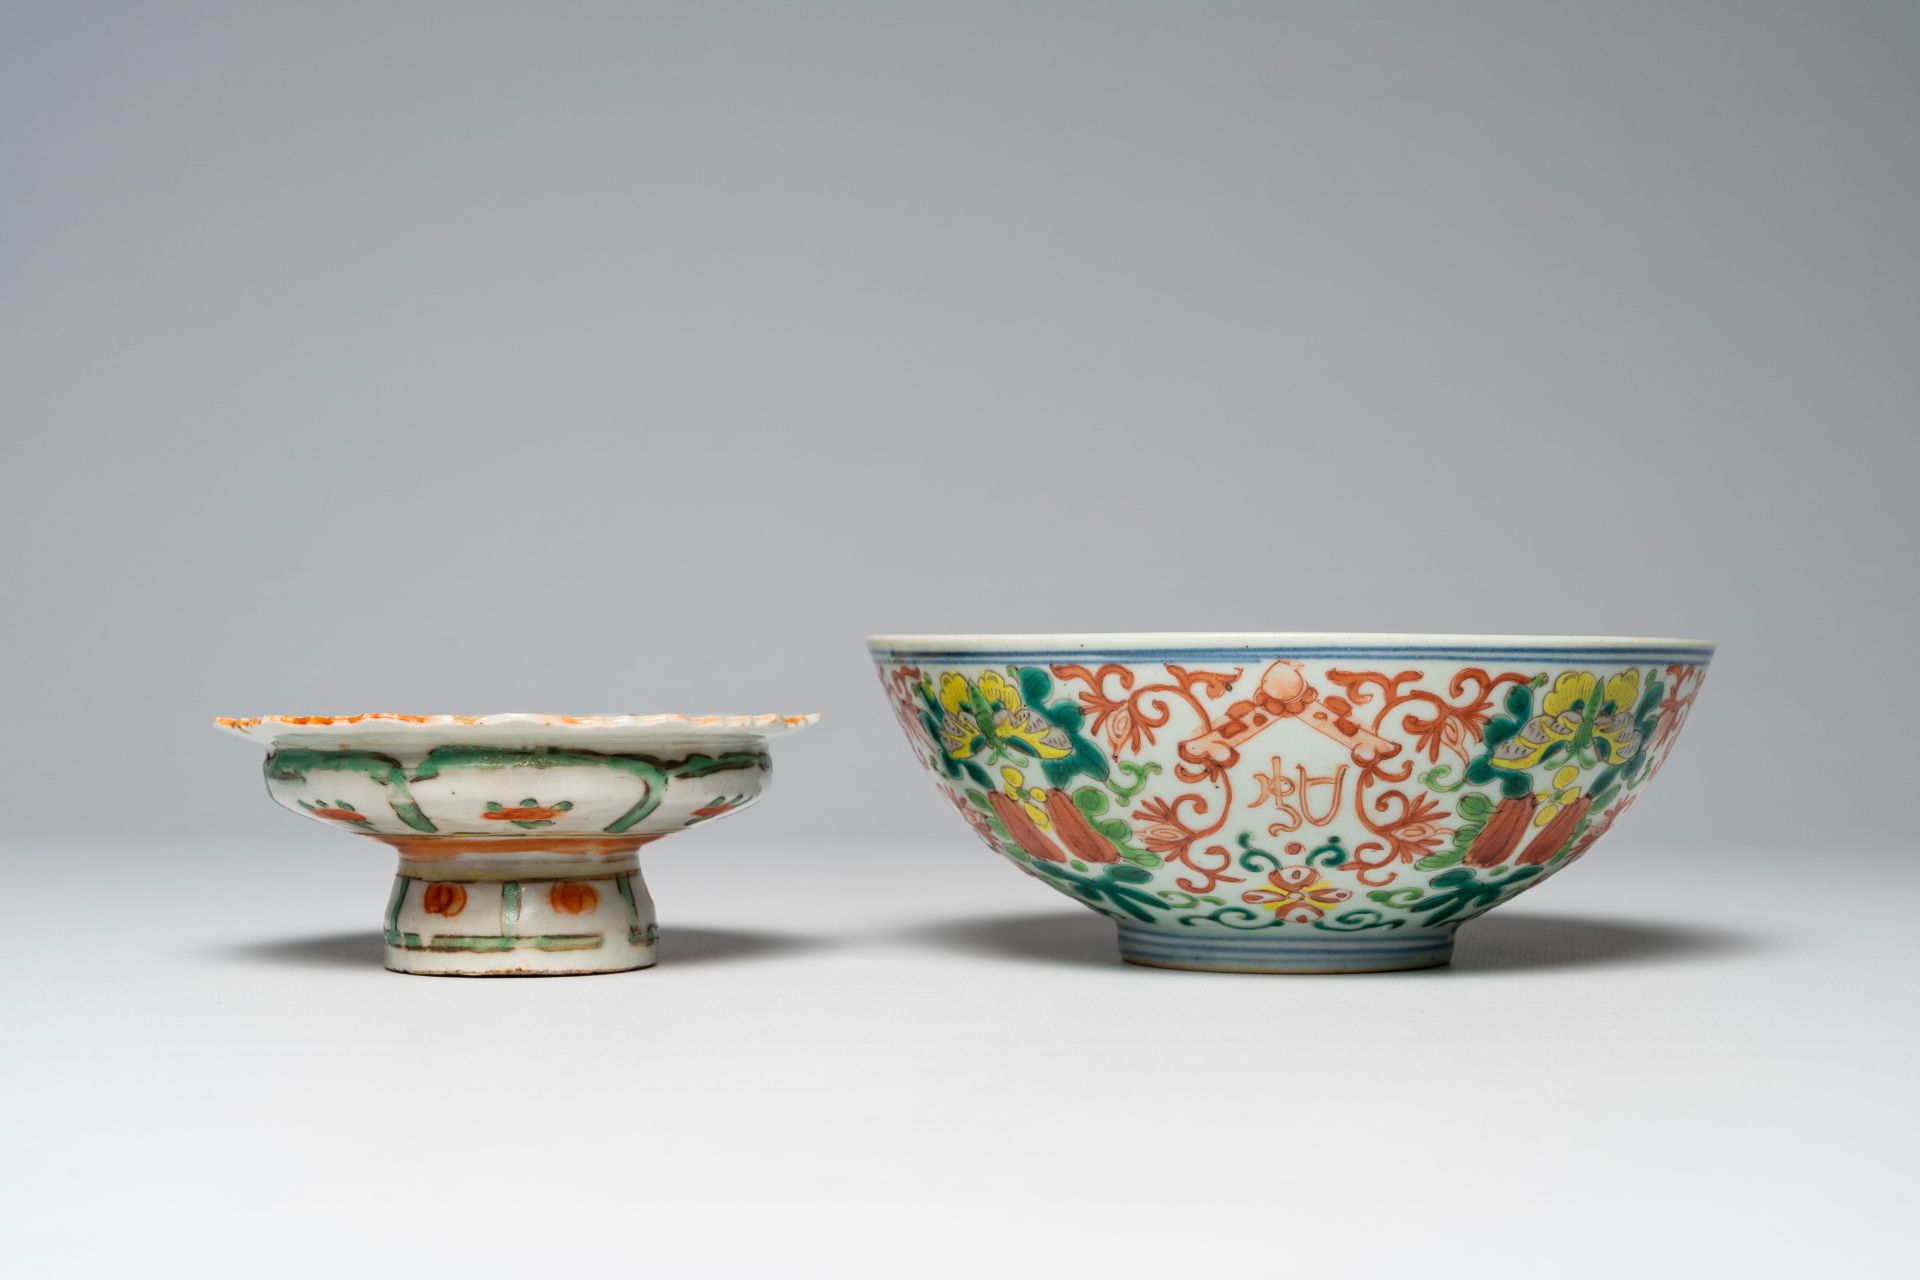 A varied collection of Chinese famille rose and polychrome porcelain, 19th/20th C. - Image 11 of 16